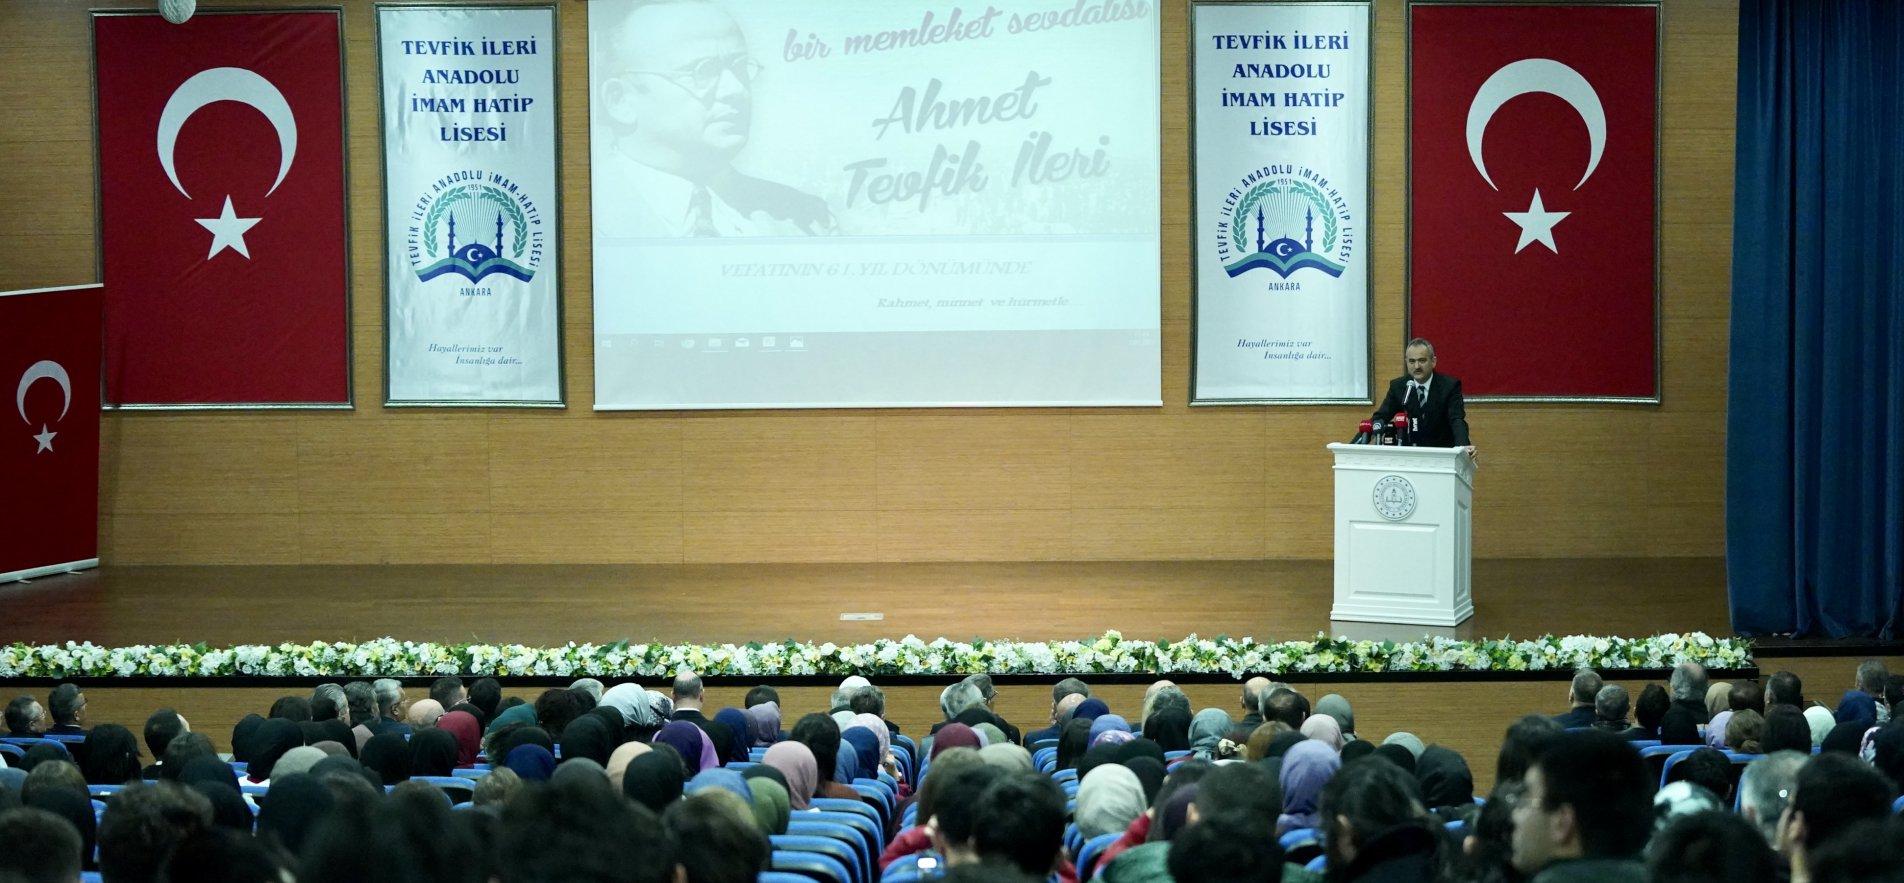 FORMER MINISTER OF NATIONAL EDUCATION TEVFİK İLERİ COMMEMORATED ON HIS 61ST DEATH ANNIVERSARY